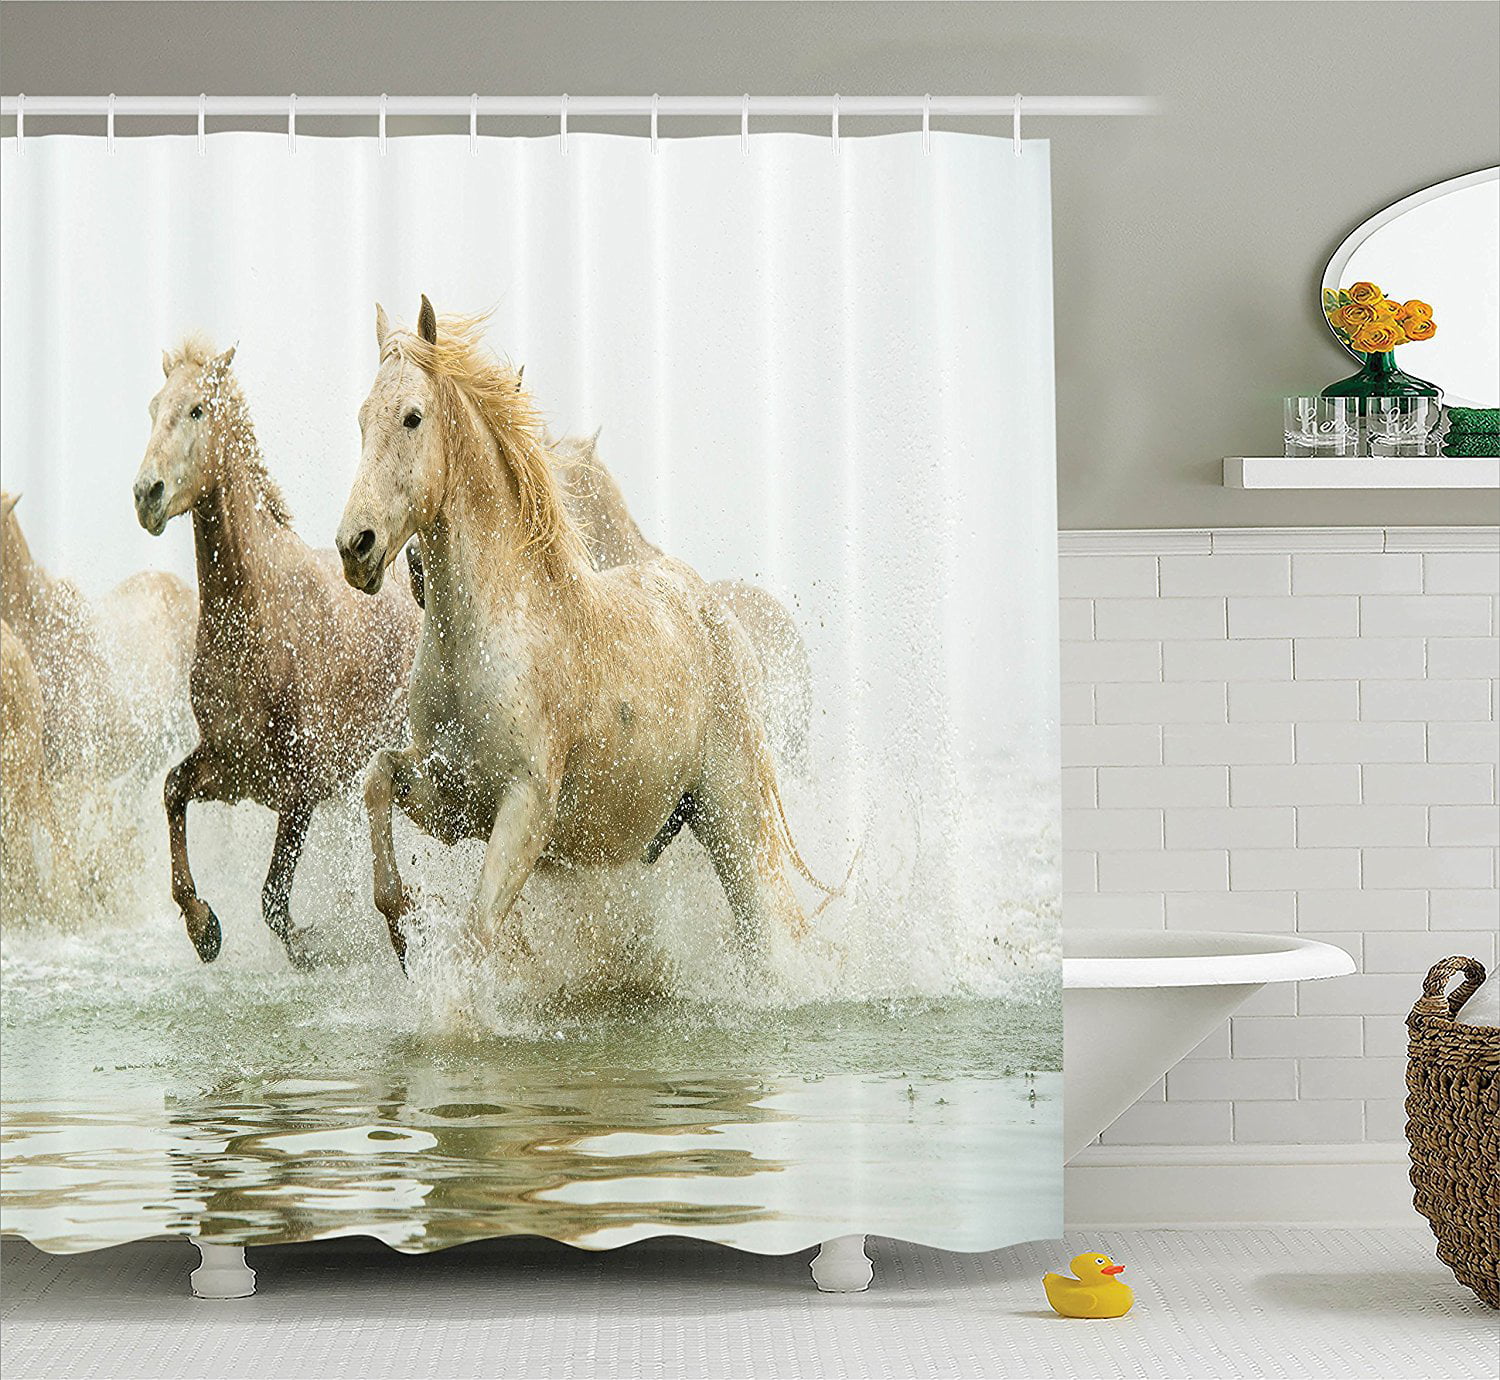 Animal Decor Aquarium Background Sticker Camargue Horses in The Water Ancient Oldest Breed in Southern France Origin Artful Photo PVC Fish Tank Background Adhesive White Beige 